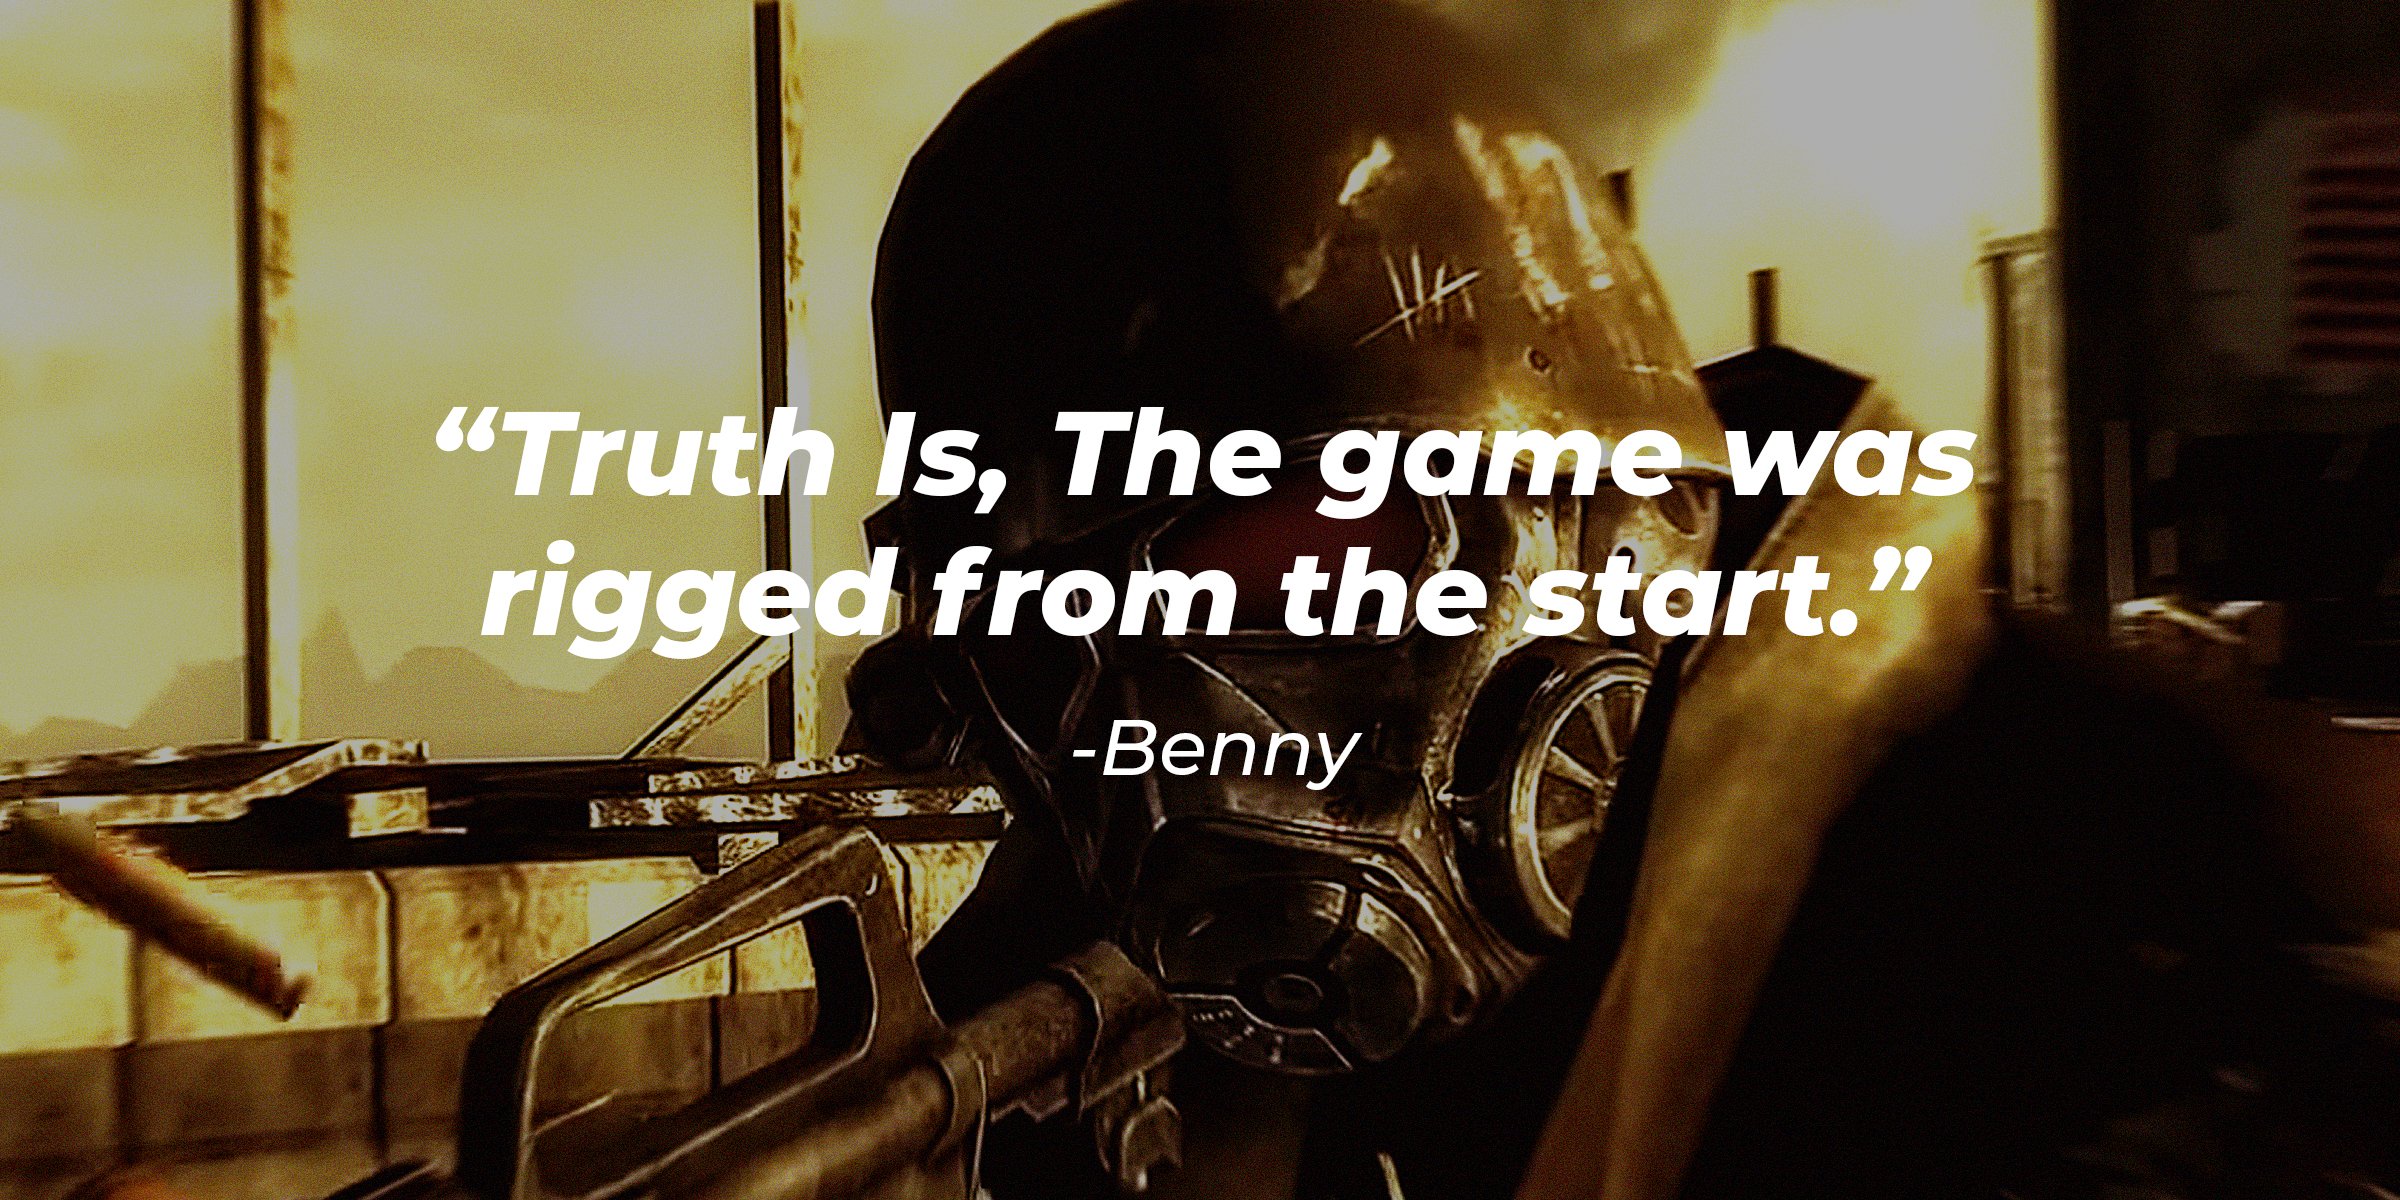 youtube.com/IGN  |  An animated picture of a man with a gas mask and gun with a quote from Benny that reads, "Truth is, the game was rigged from the start."